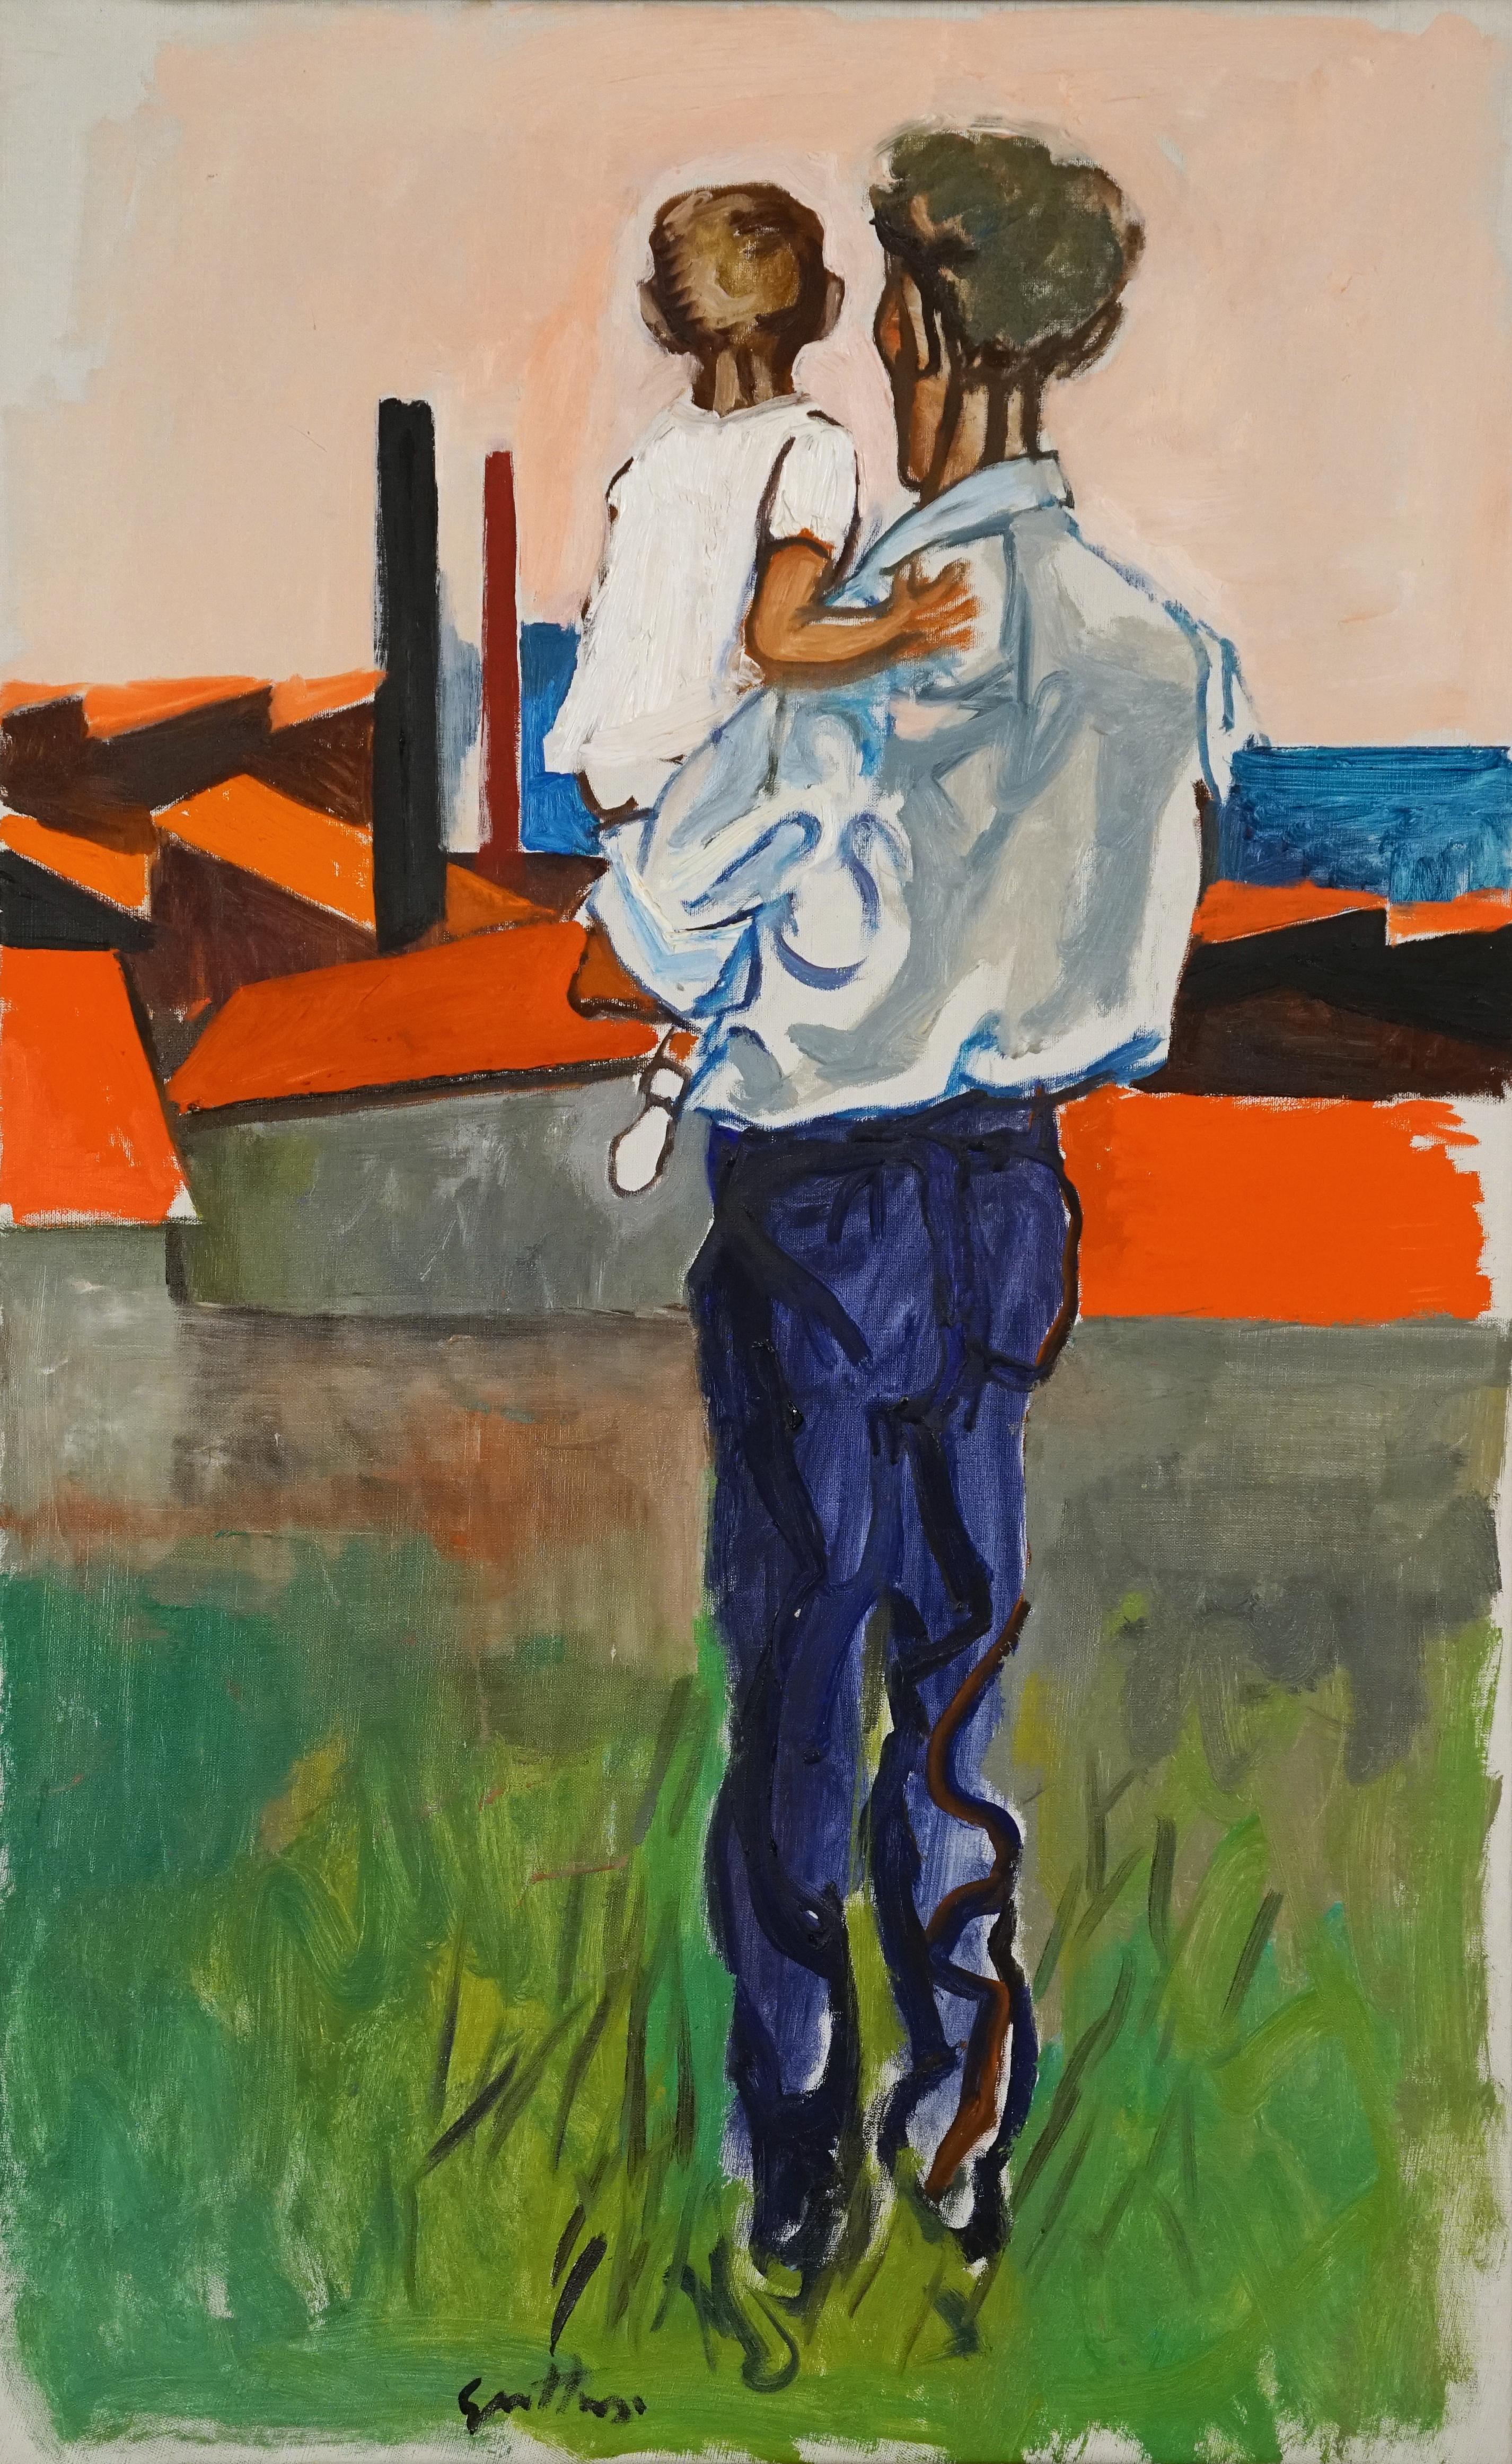 Father & Child - Painting by Renato Guttuso